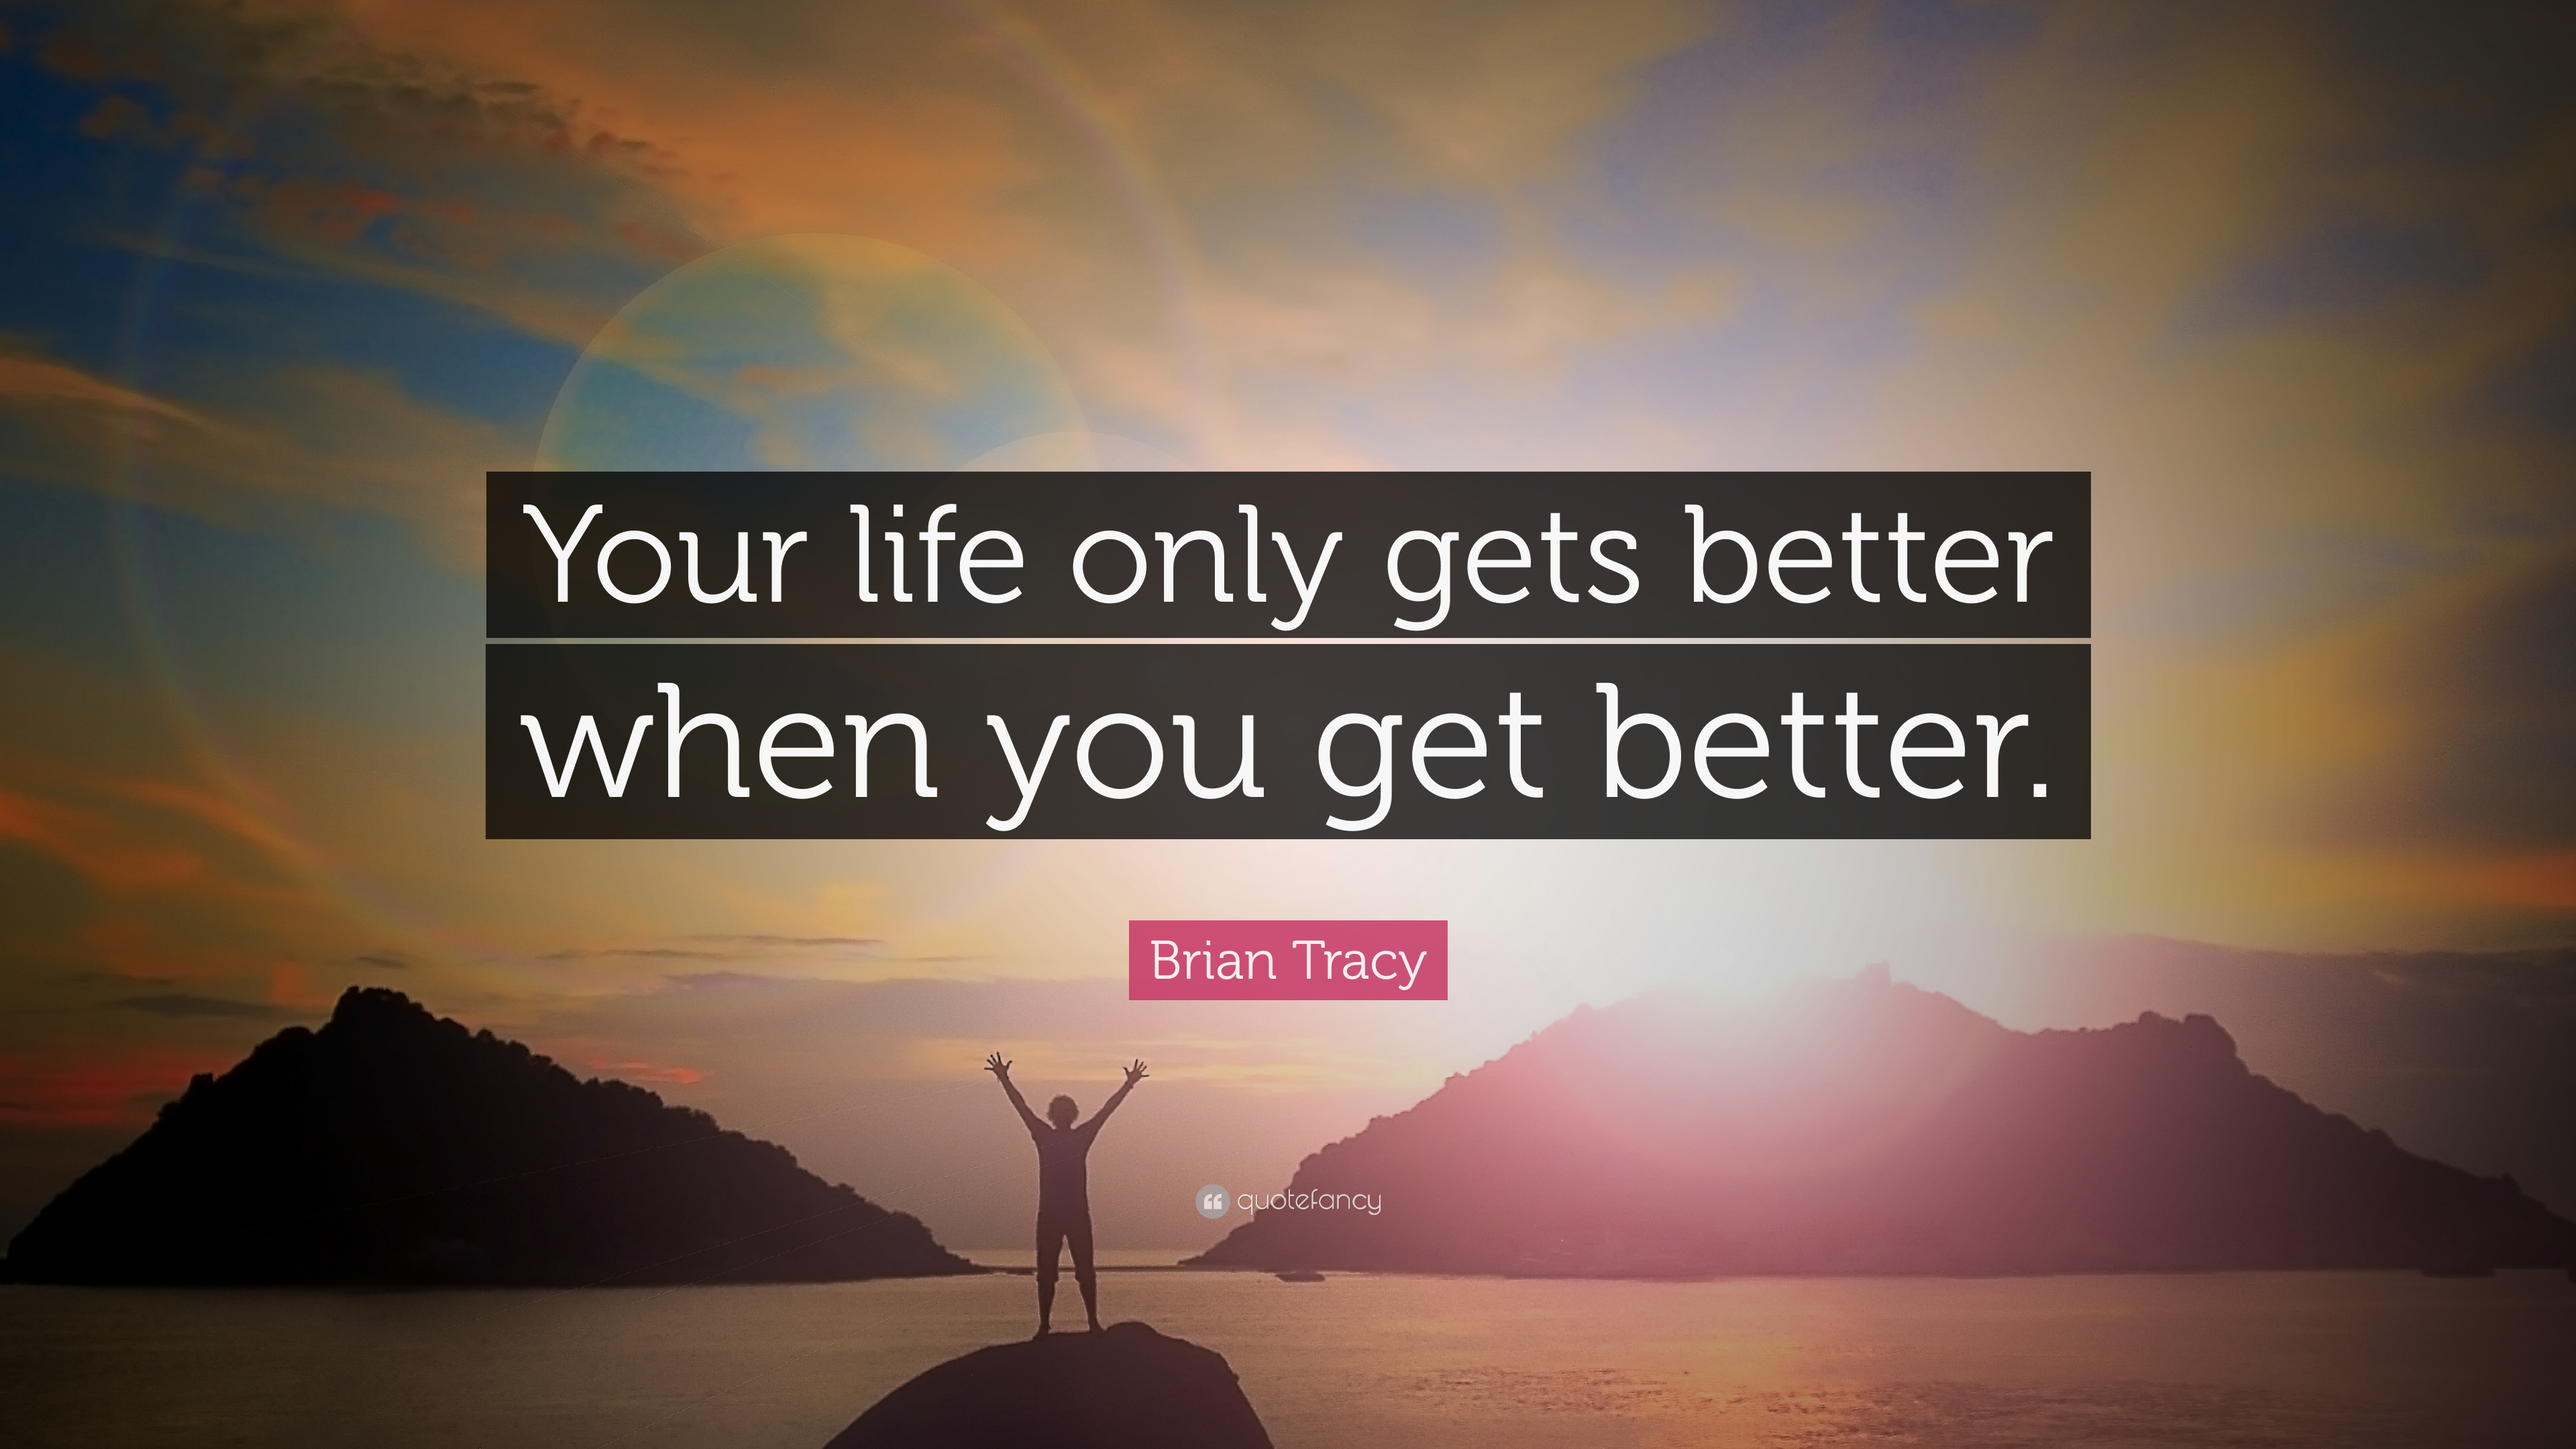 Brian Tracy Quotes (2021 Update)